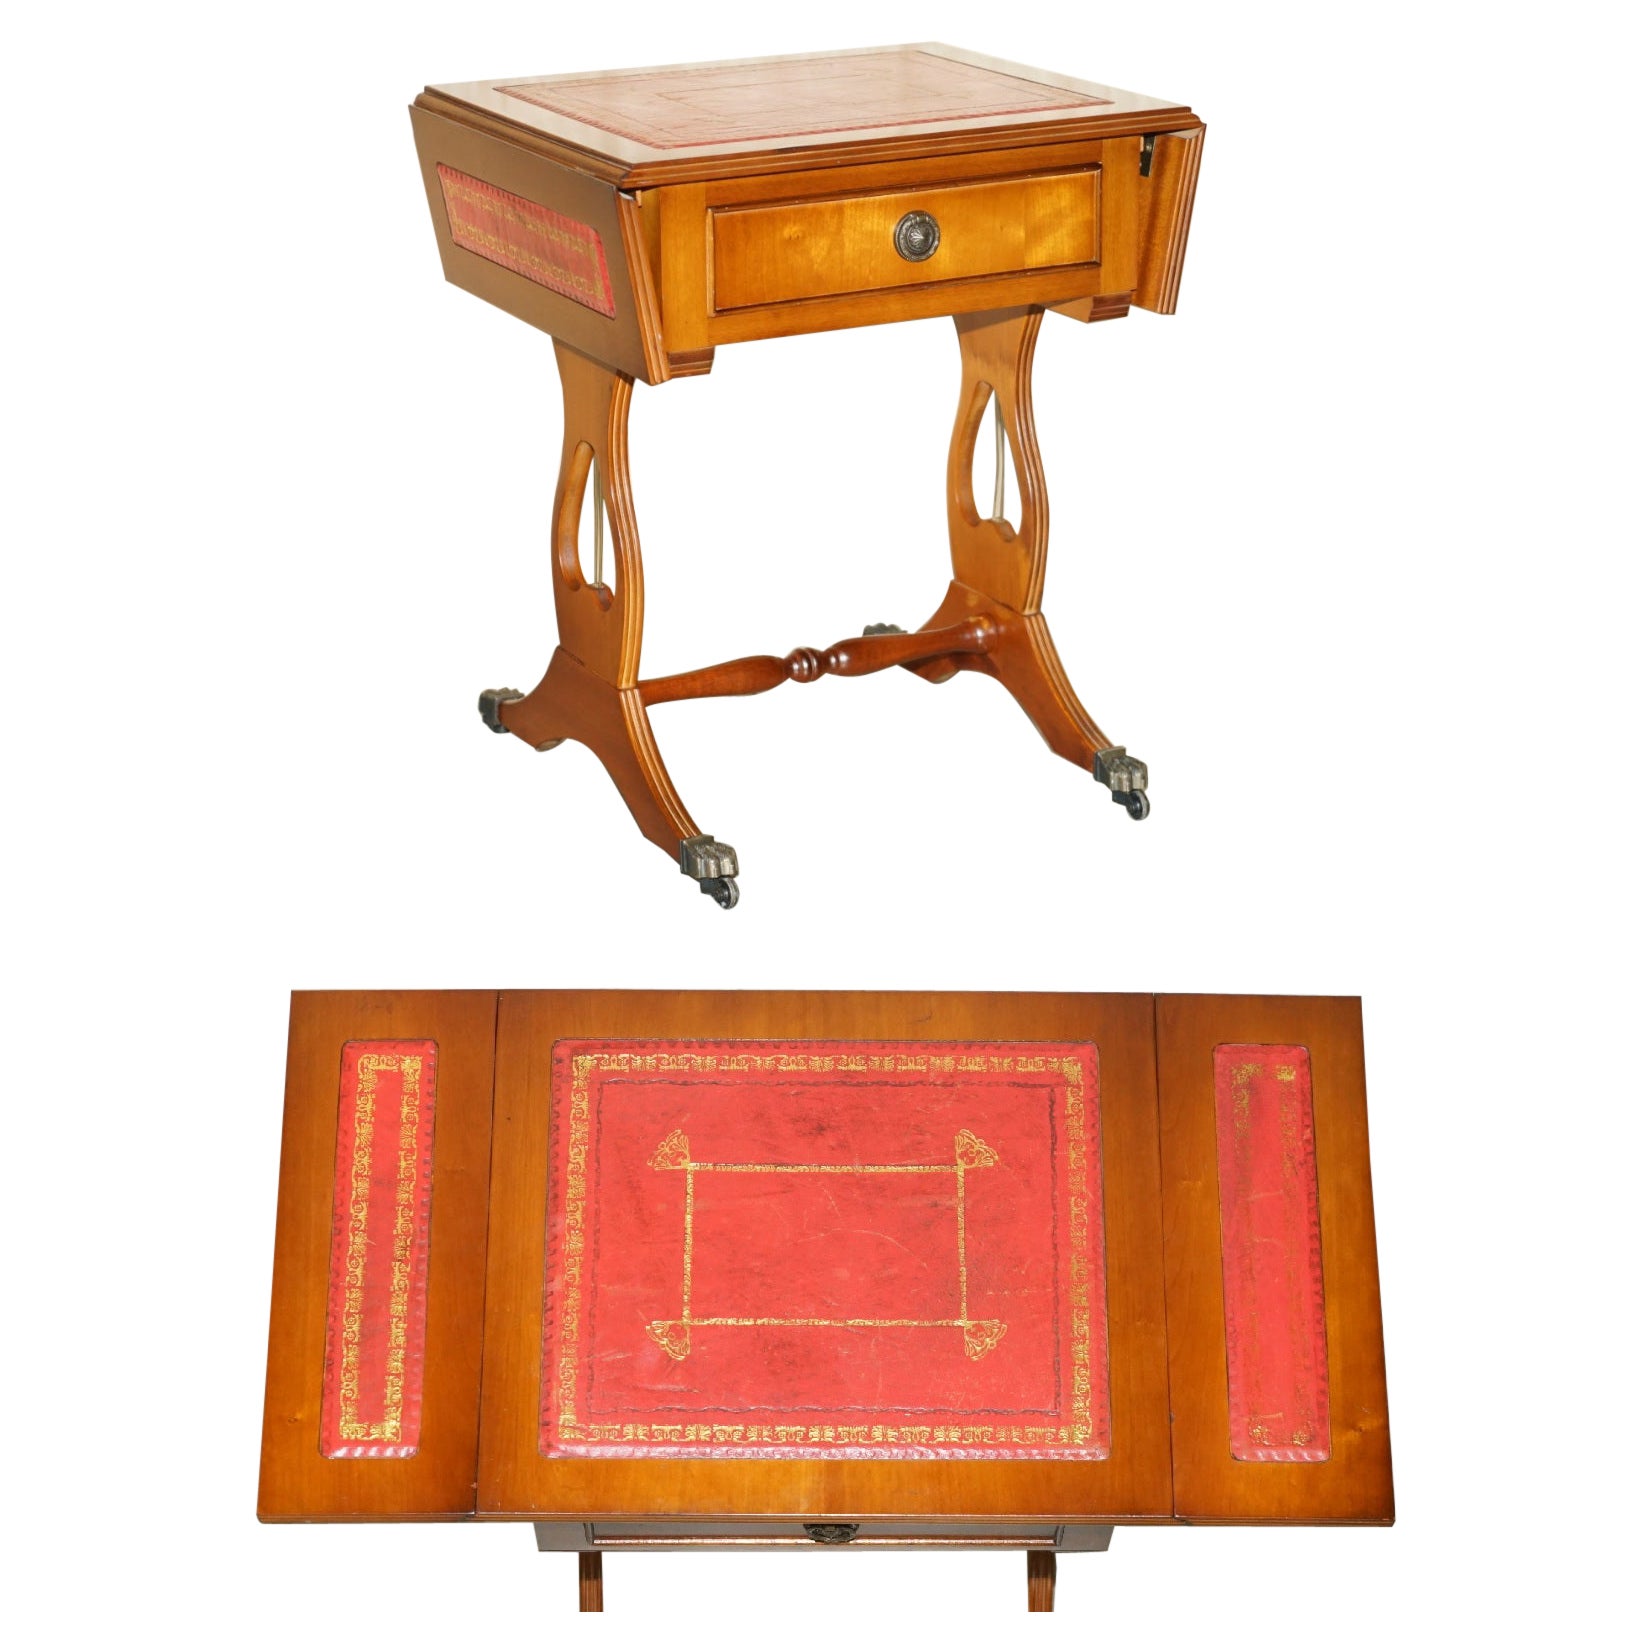 LOVELY ViNTAGE OXBLOOD LEATHER EXTENDING SIDE TABLE WITH GOLD LEAF INLAY